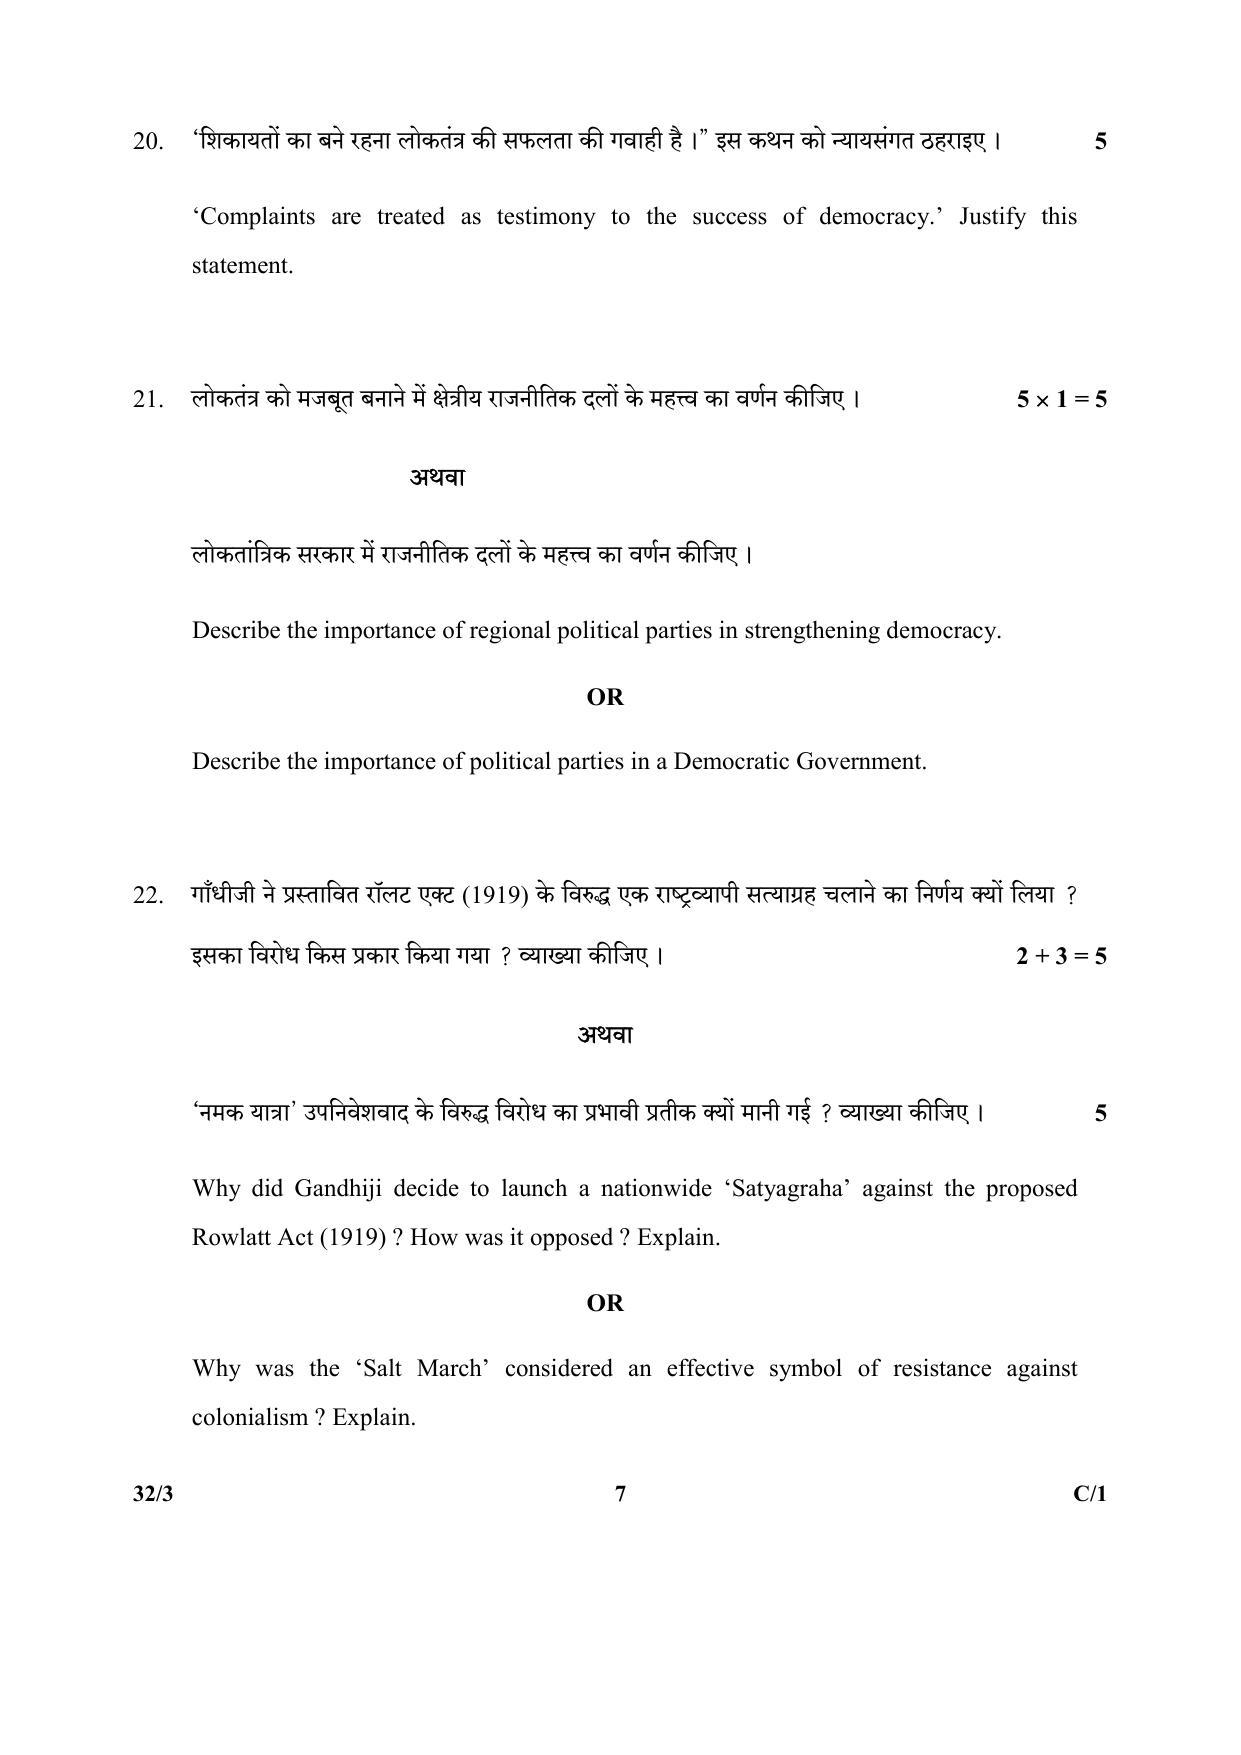 CBSE Class 10 32-3_Social Science 2018 Compartment Question Paper - Page 7